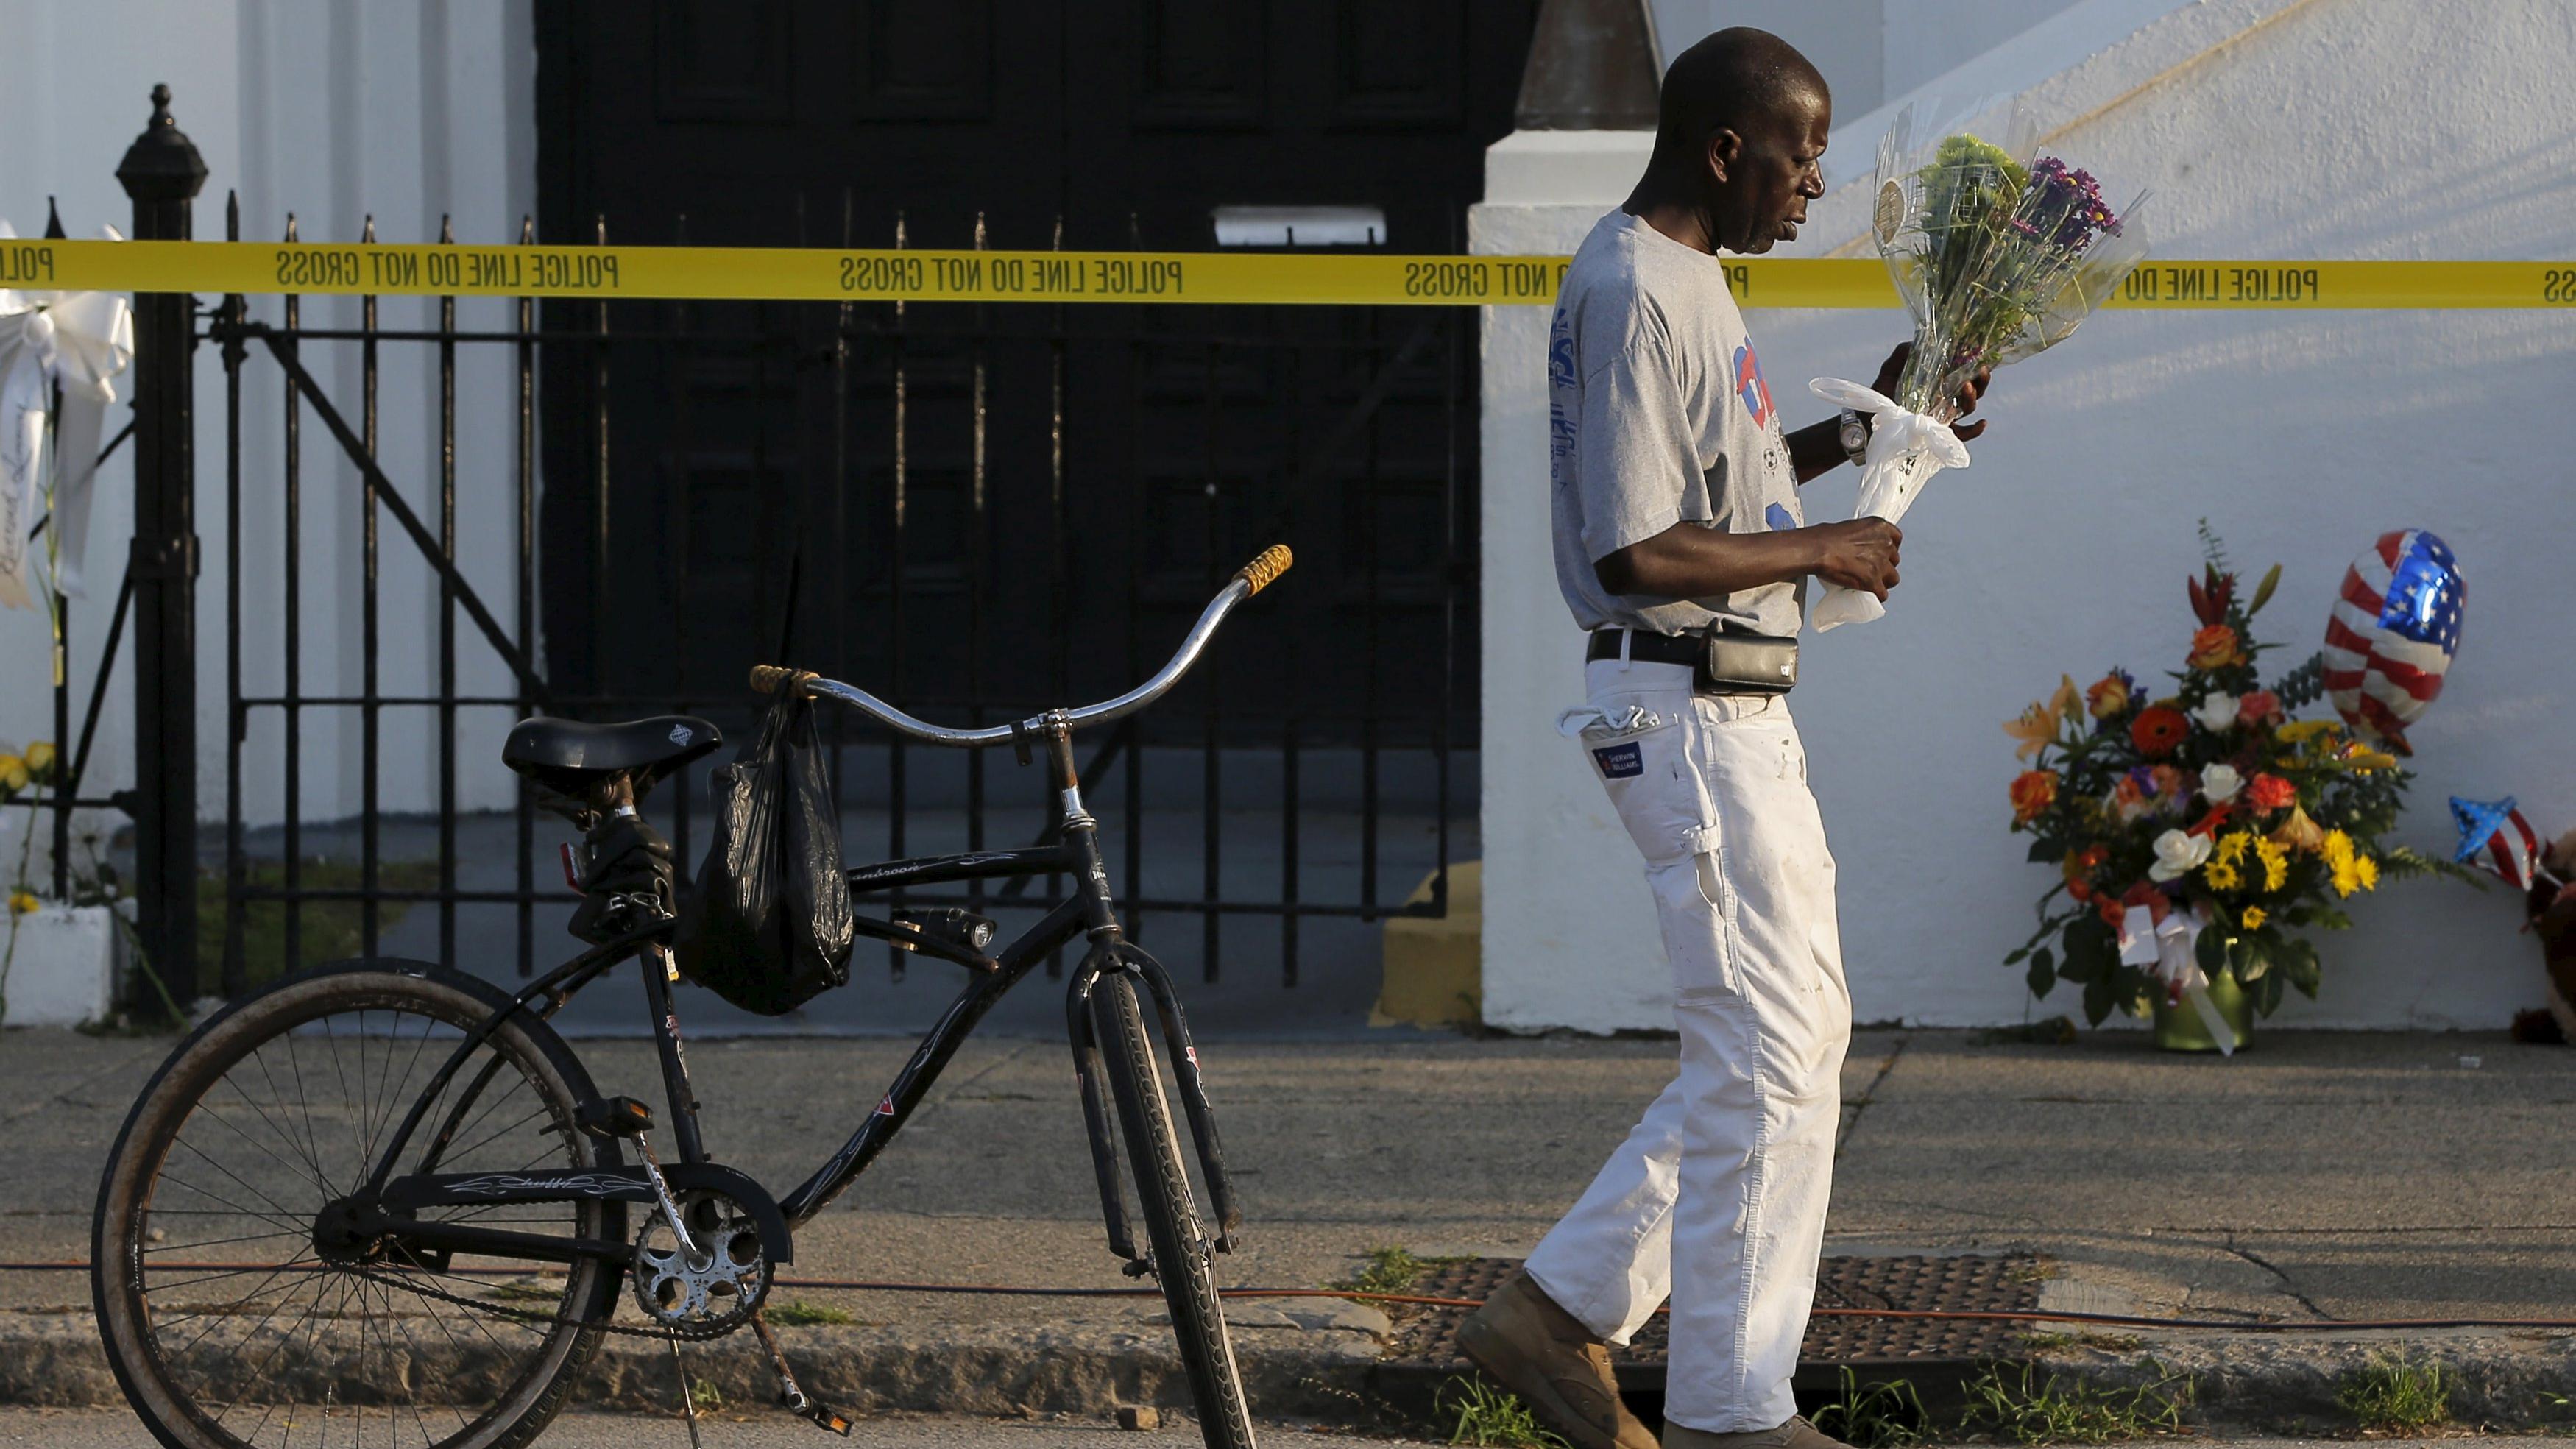 Larry Gorham pays his respects outside the Emanuel AME Church in Charleston, South Carolina June 19, 2015, two days after a mass shooting left nine dead.